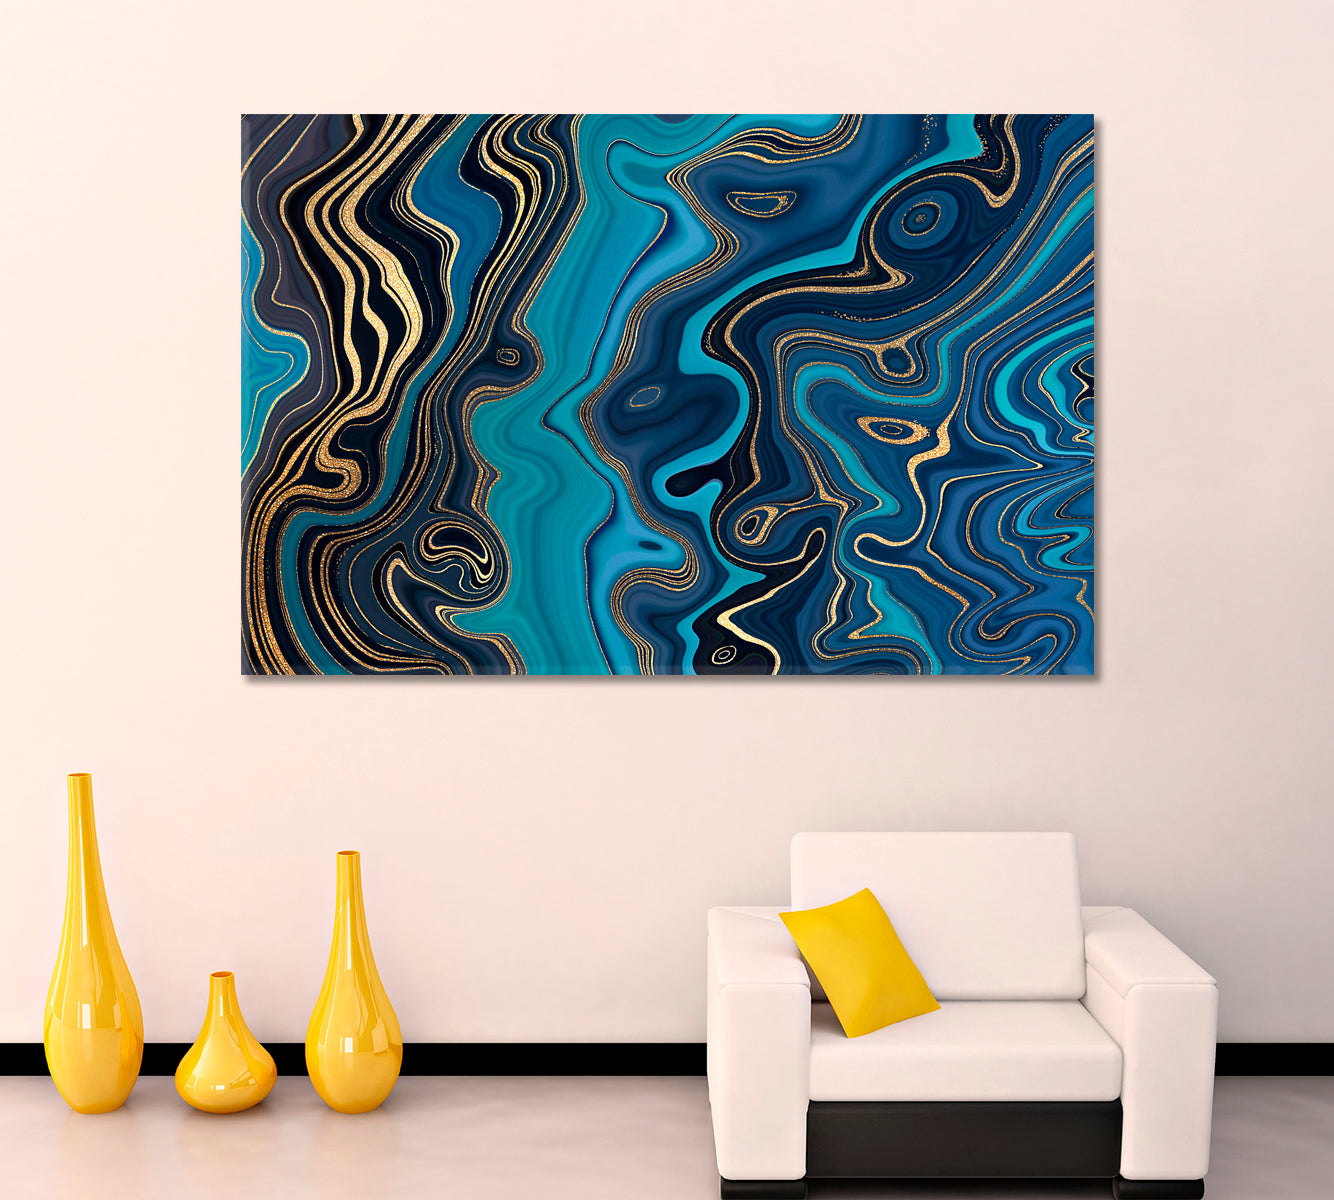 MARBLE EFFECT series Turquoise Navy Blue & Gold Abstract Swirl Artistic Design Giclée Print Fluid Art, Oriental Marbling Canvas Print Artesty   